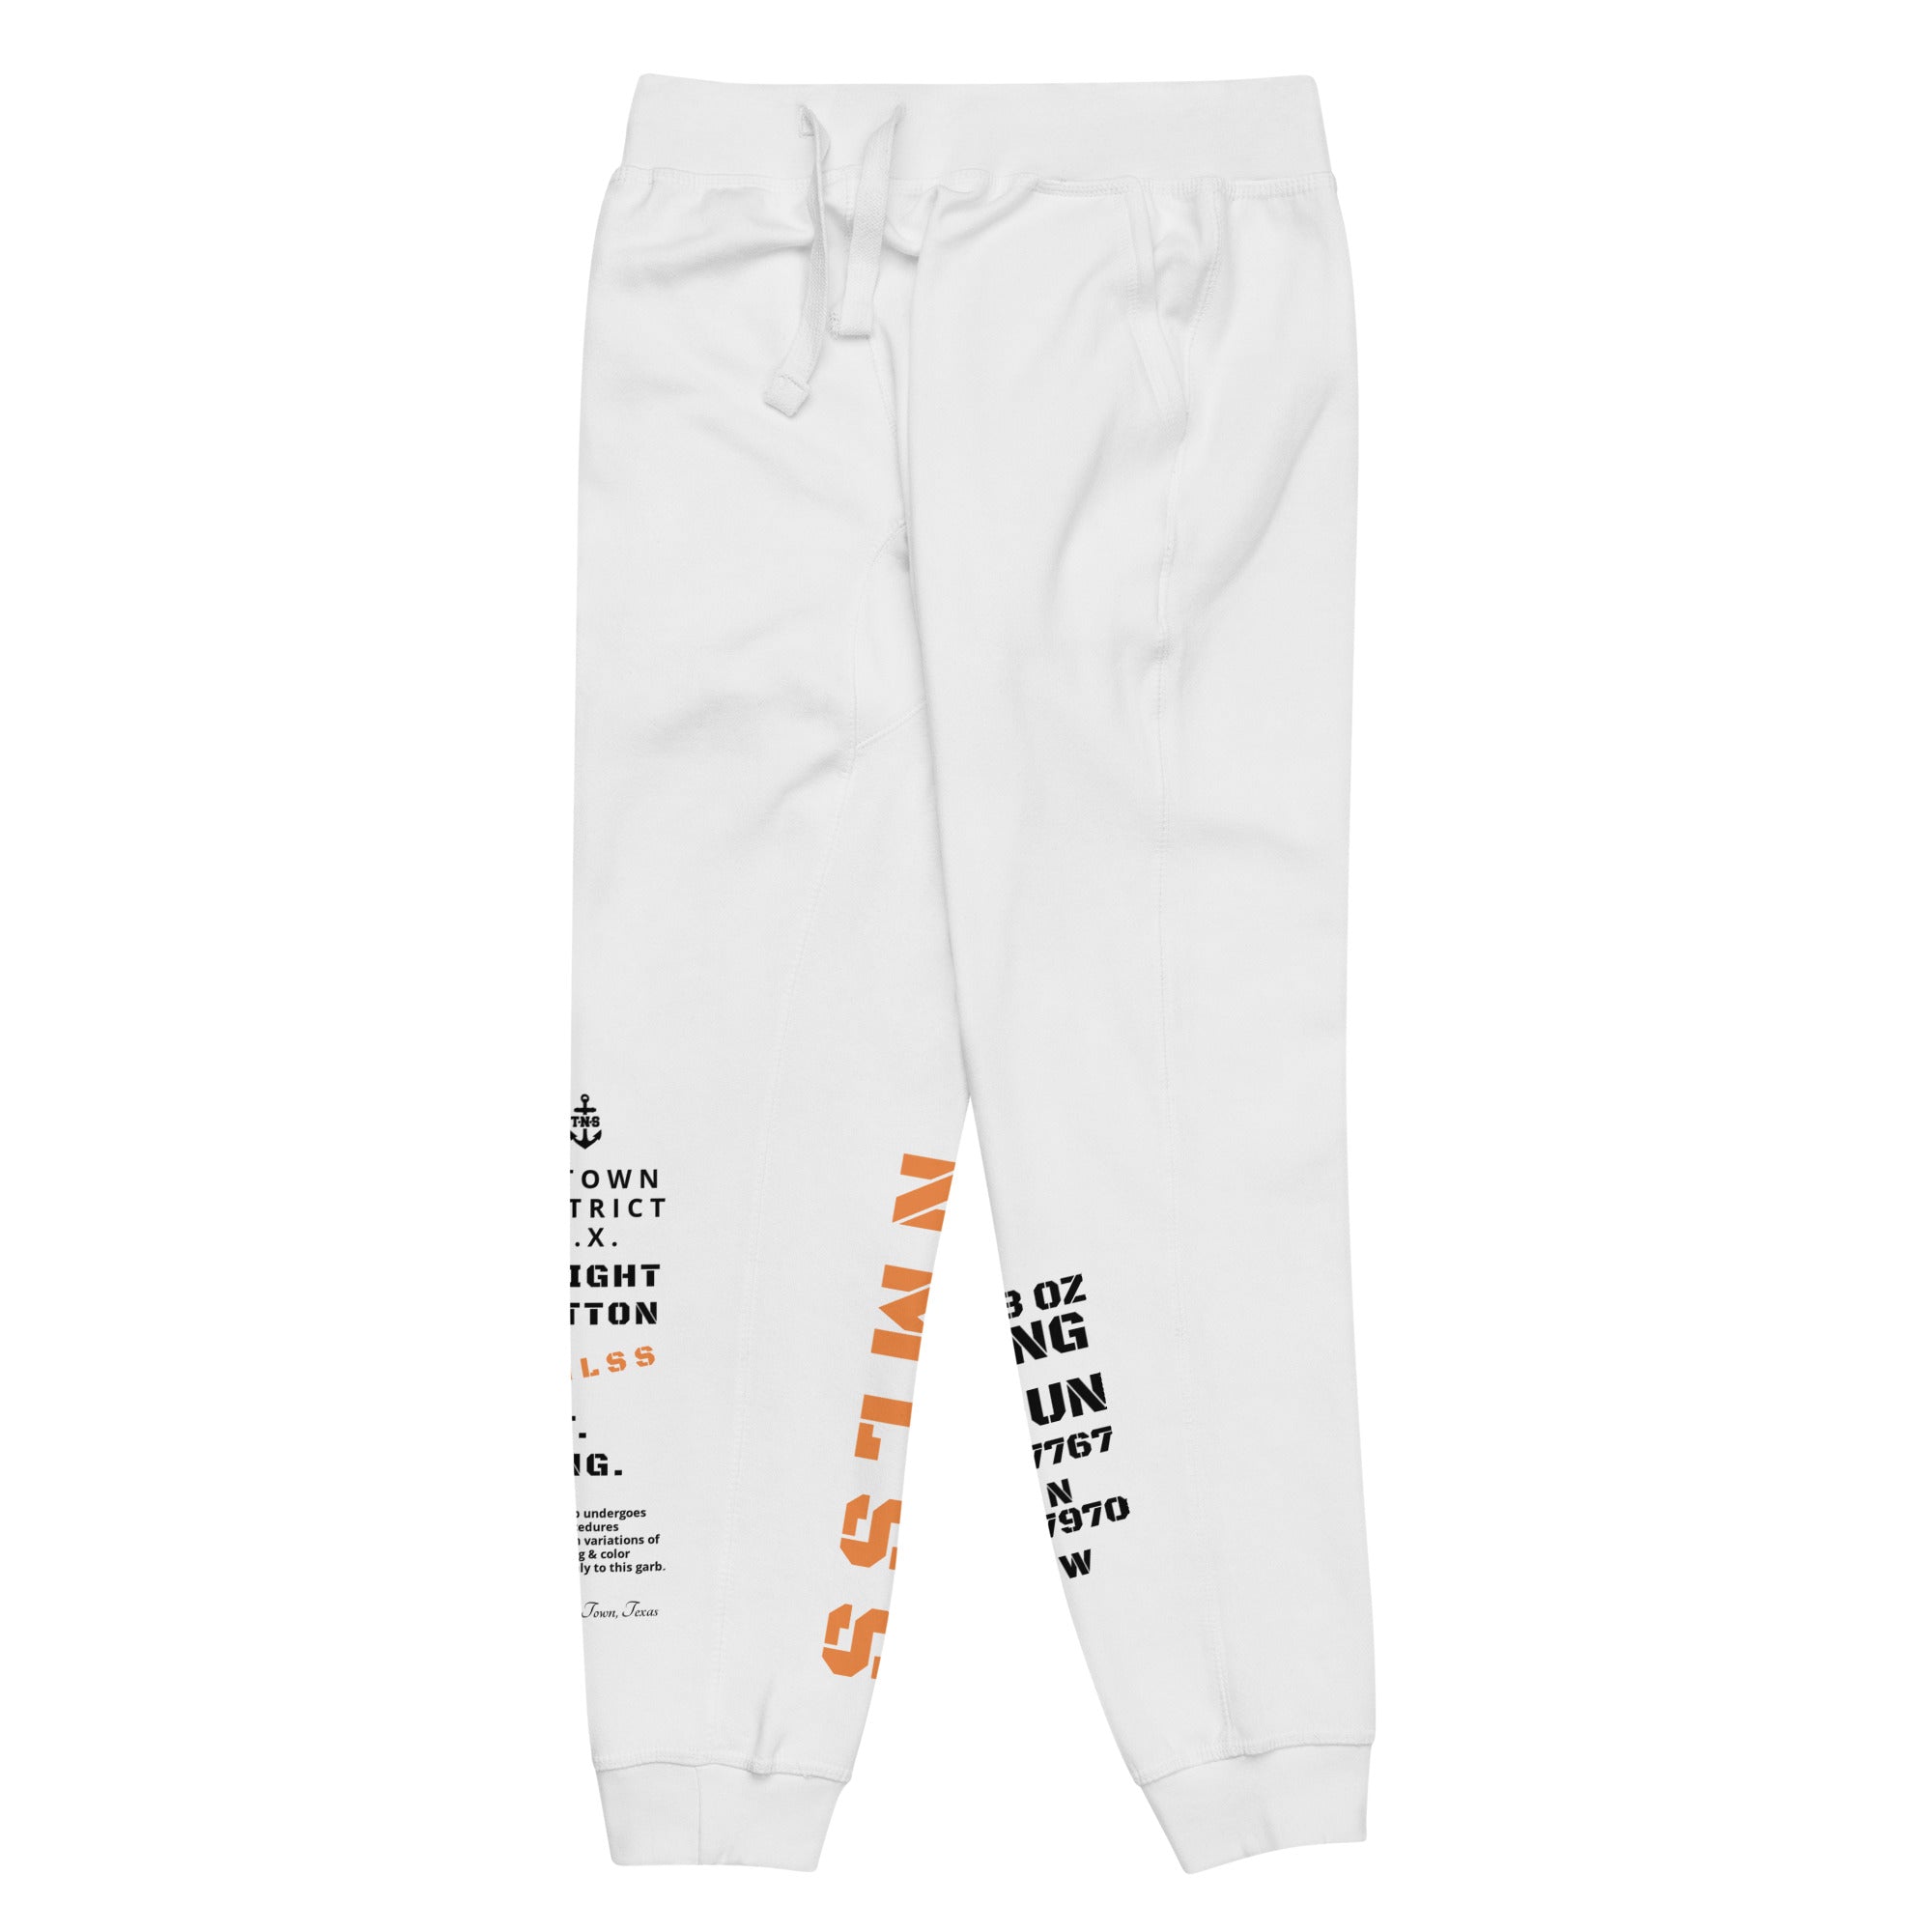 NAMELESS SPECIAL OPS SWEATPANTS - WHITE